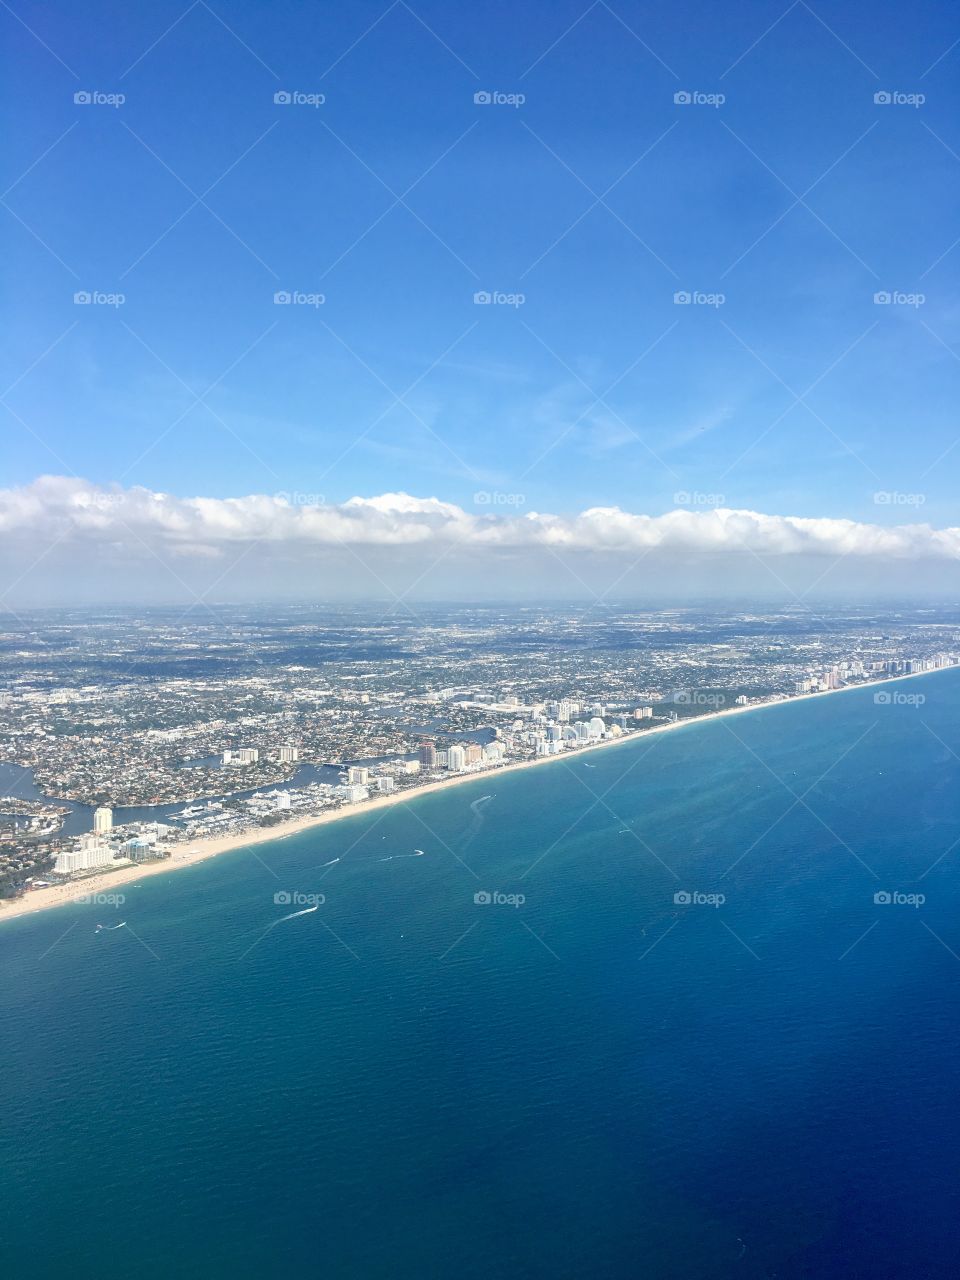 Flying out of Ft. Lauderdale 